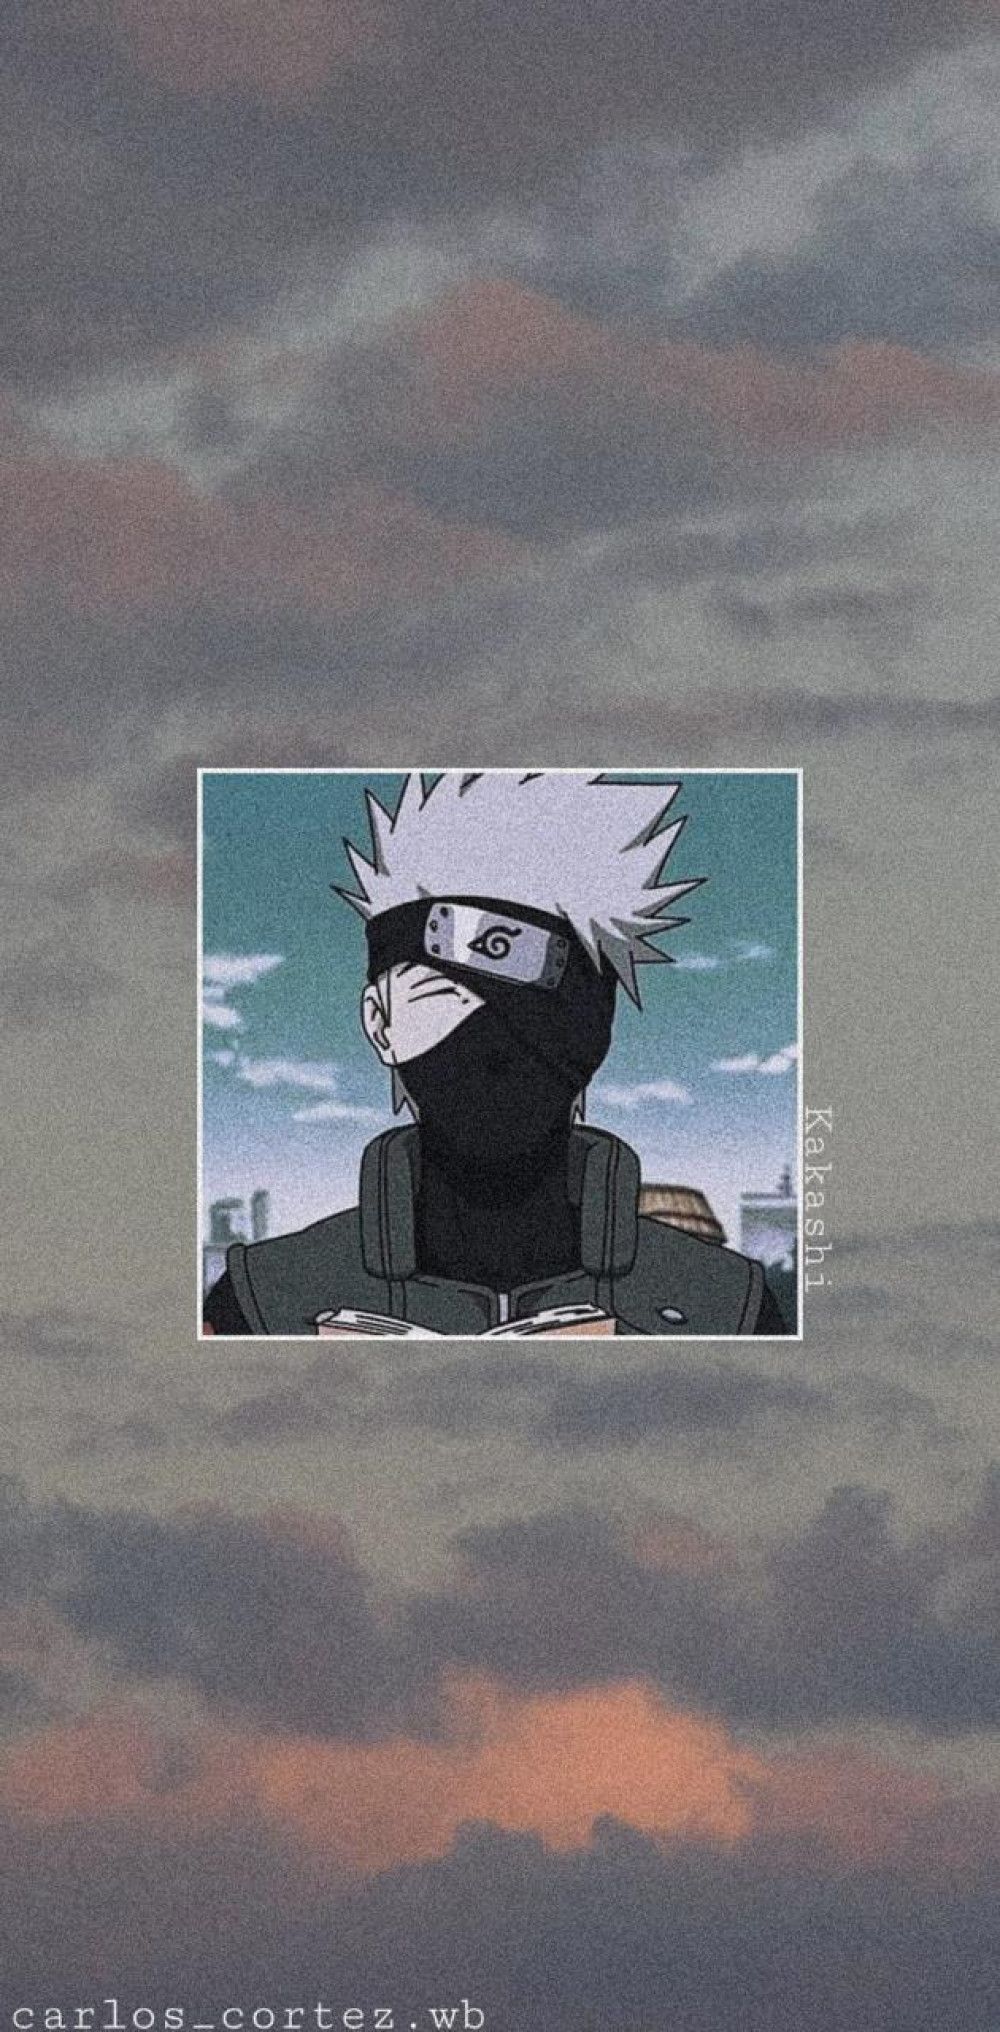 Kakashi Hatake wallpaper for phone with high-resolution 1080x1920 pixel. You can use this wallpaper for your iPhone 5, 6, 7, 8, X, XS, XR backgrounds, Mobile Screensaver, or iPad Lock Screen - Kakashi Hatake